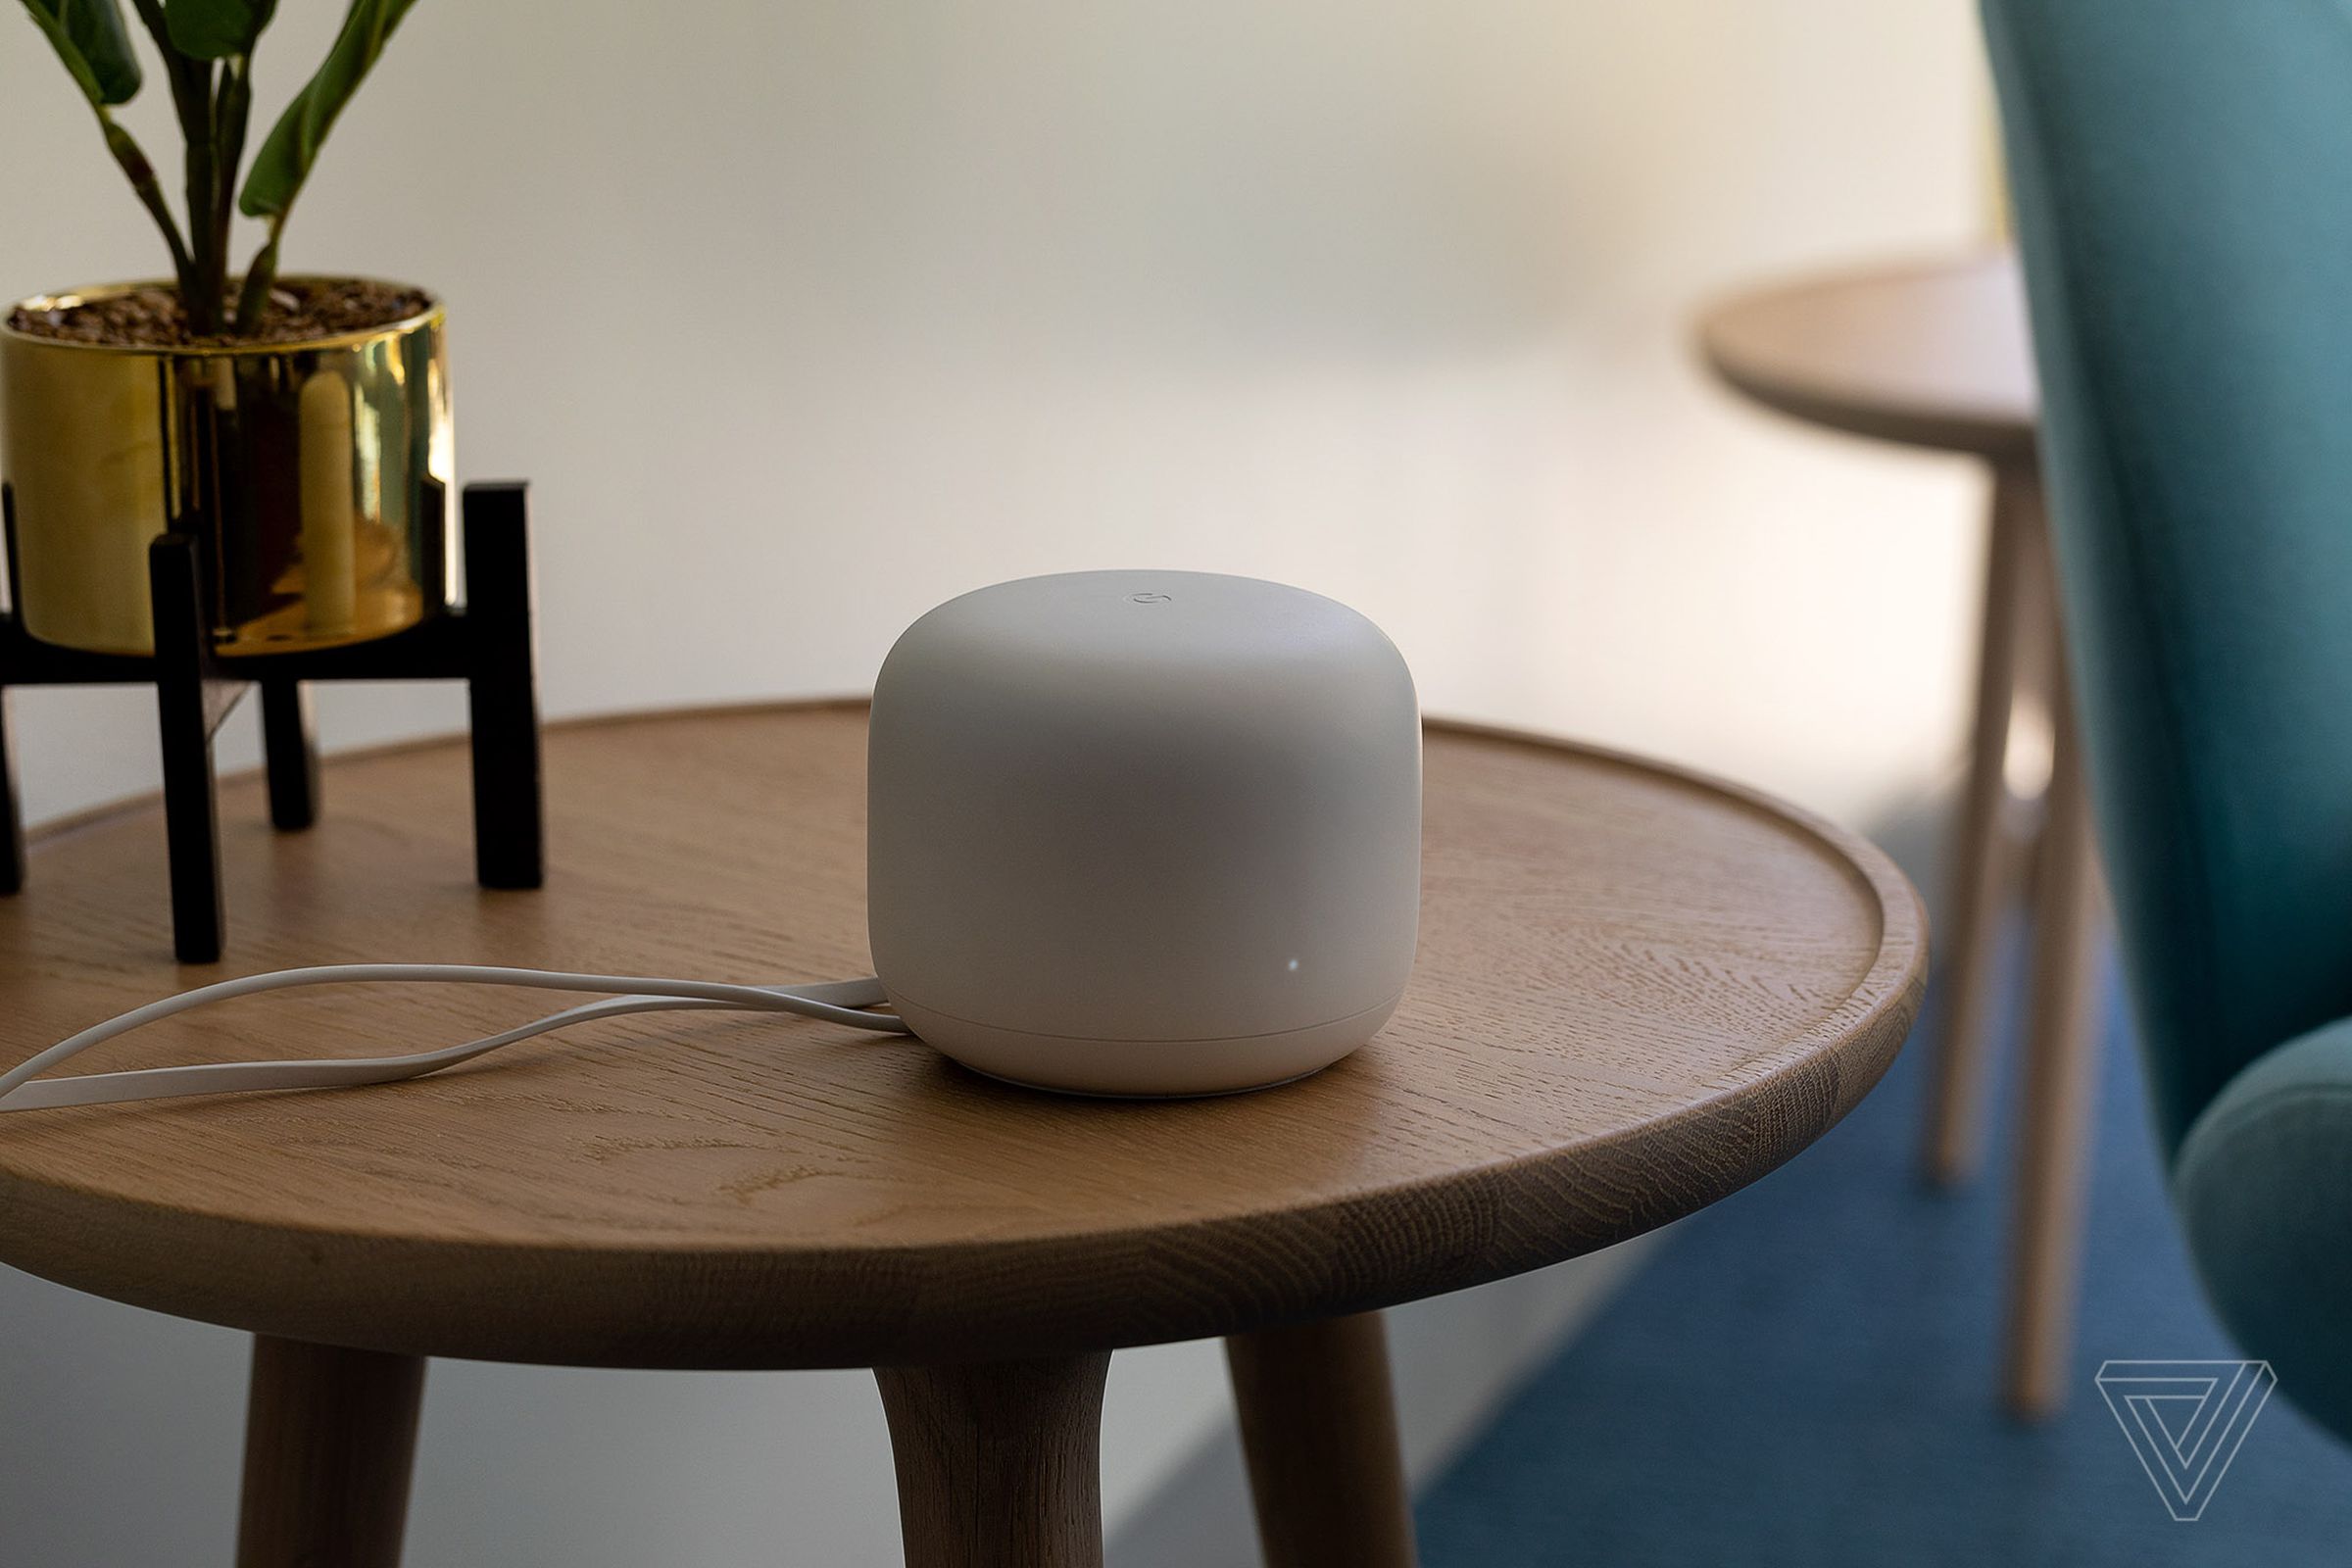 Google Home device on a side table.